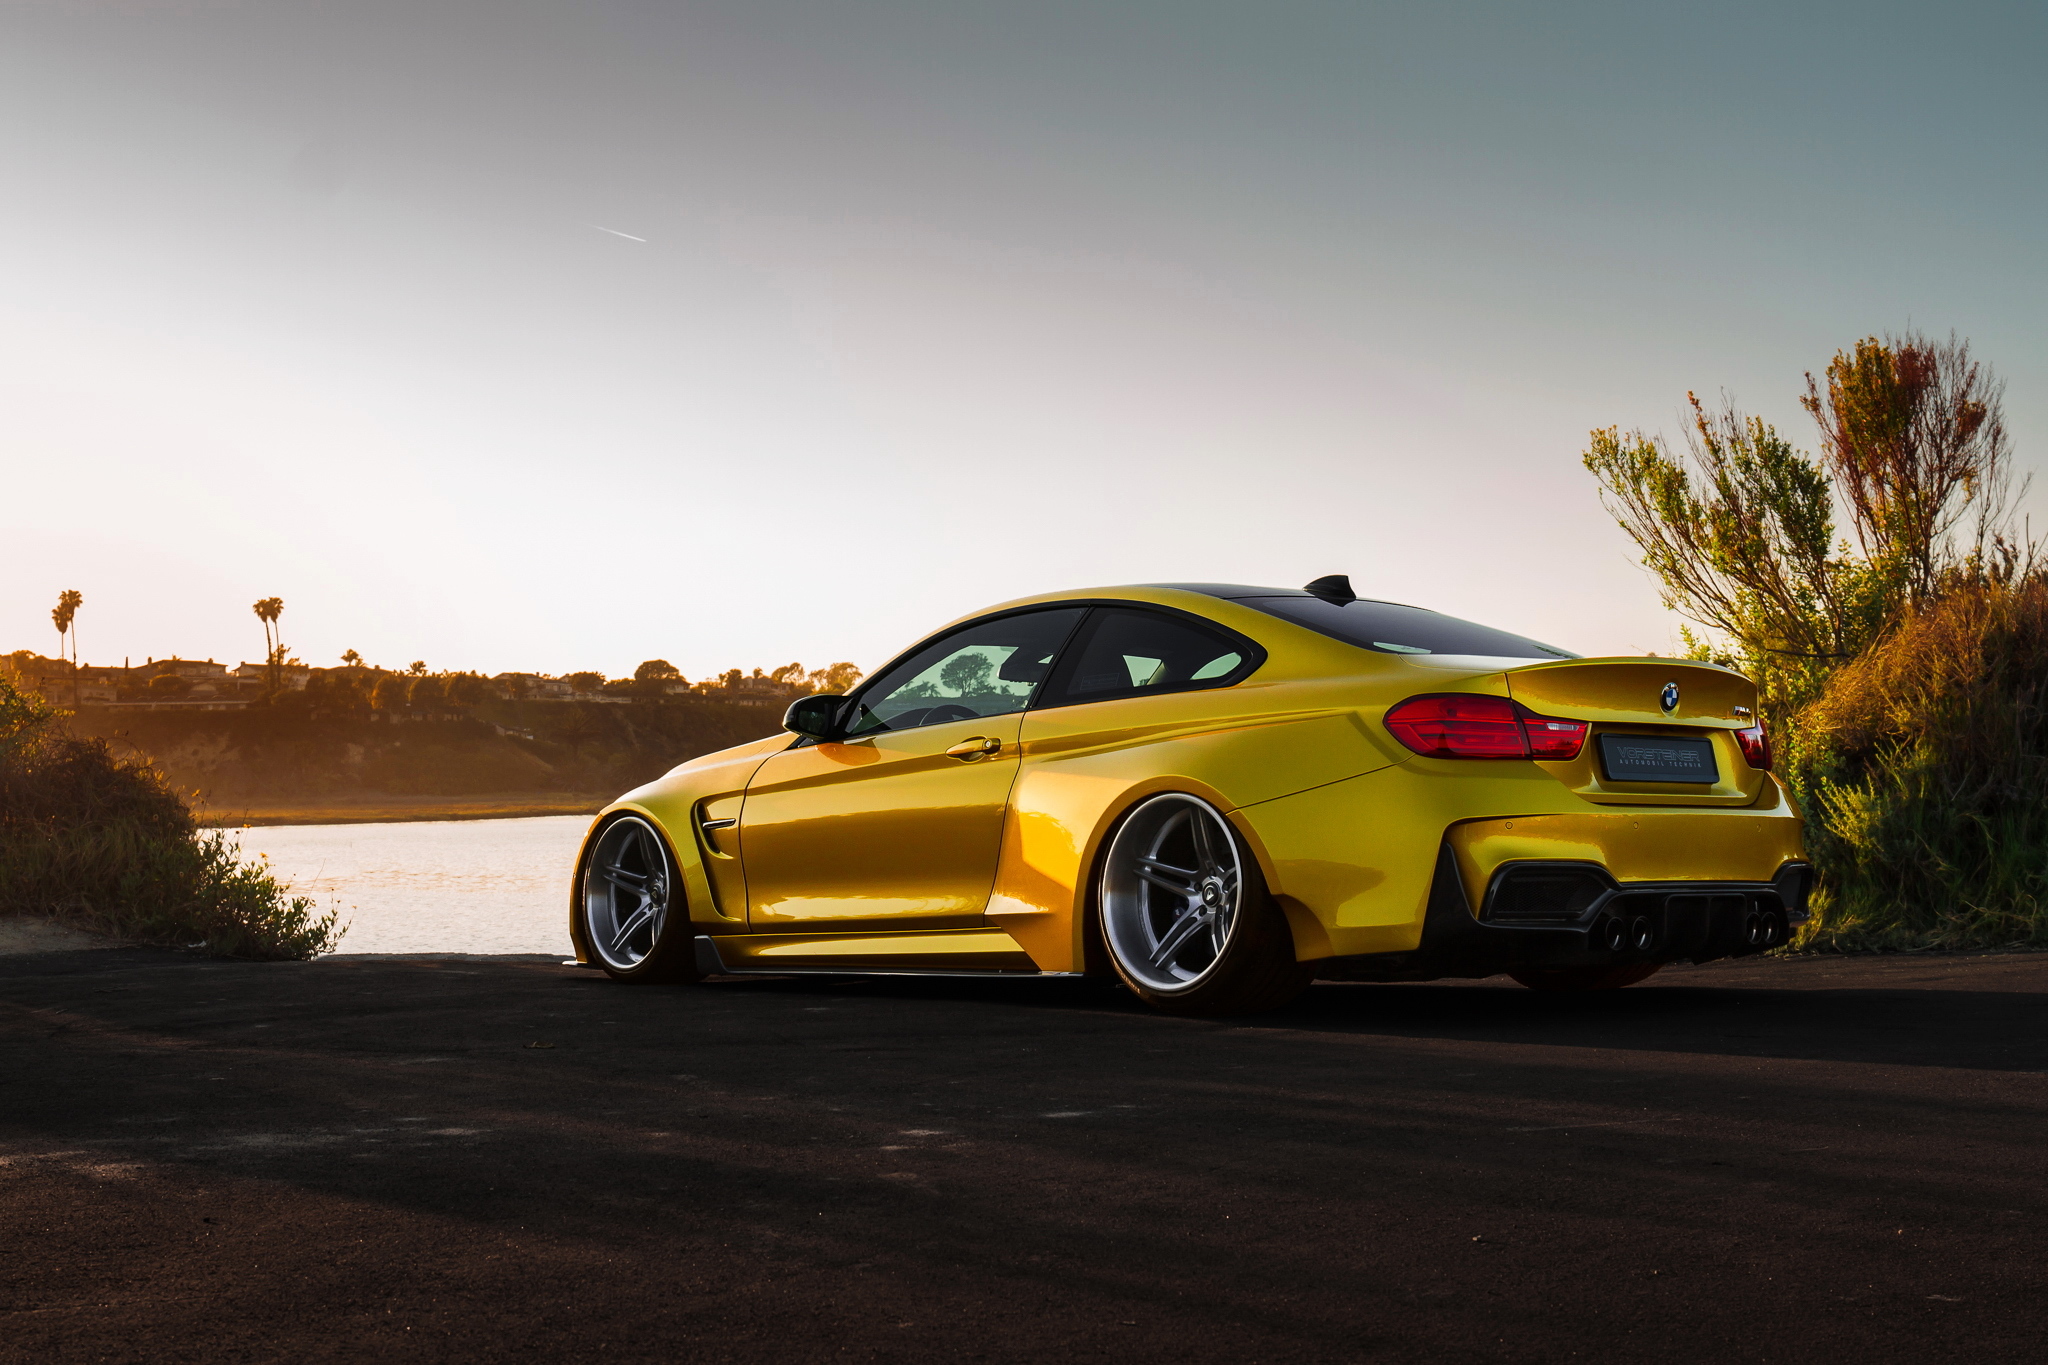 bmw, gtrs4, golden, m4 collection of HD images